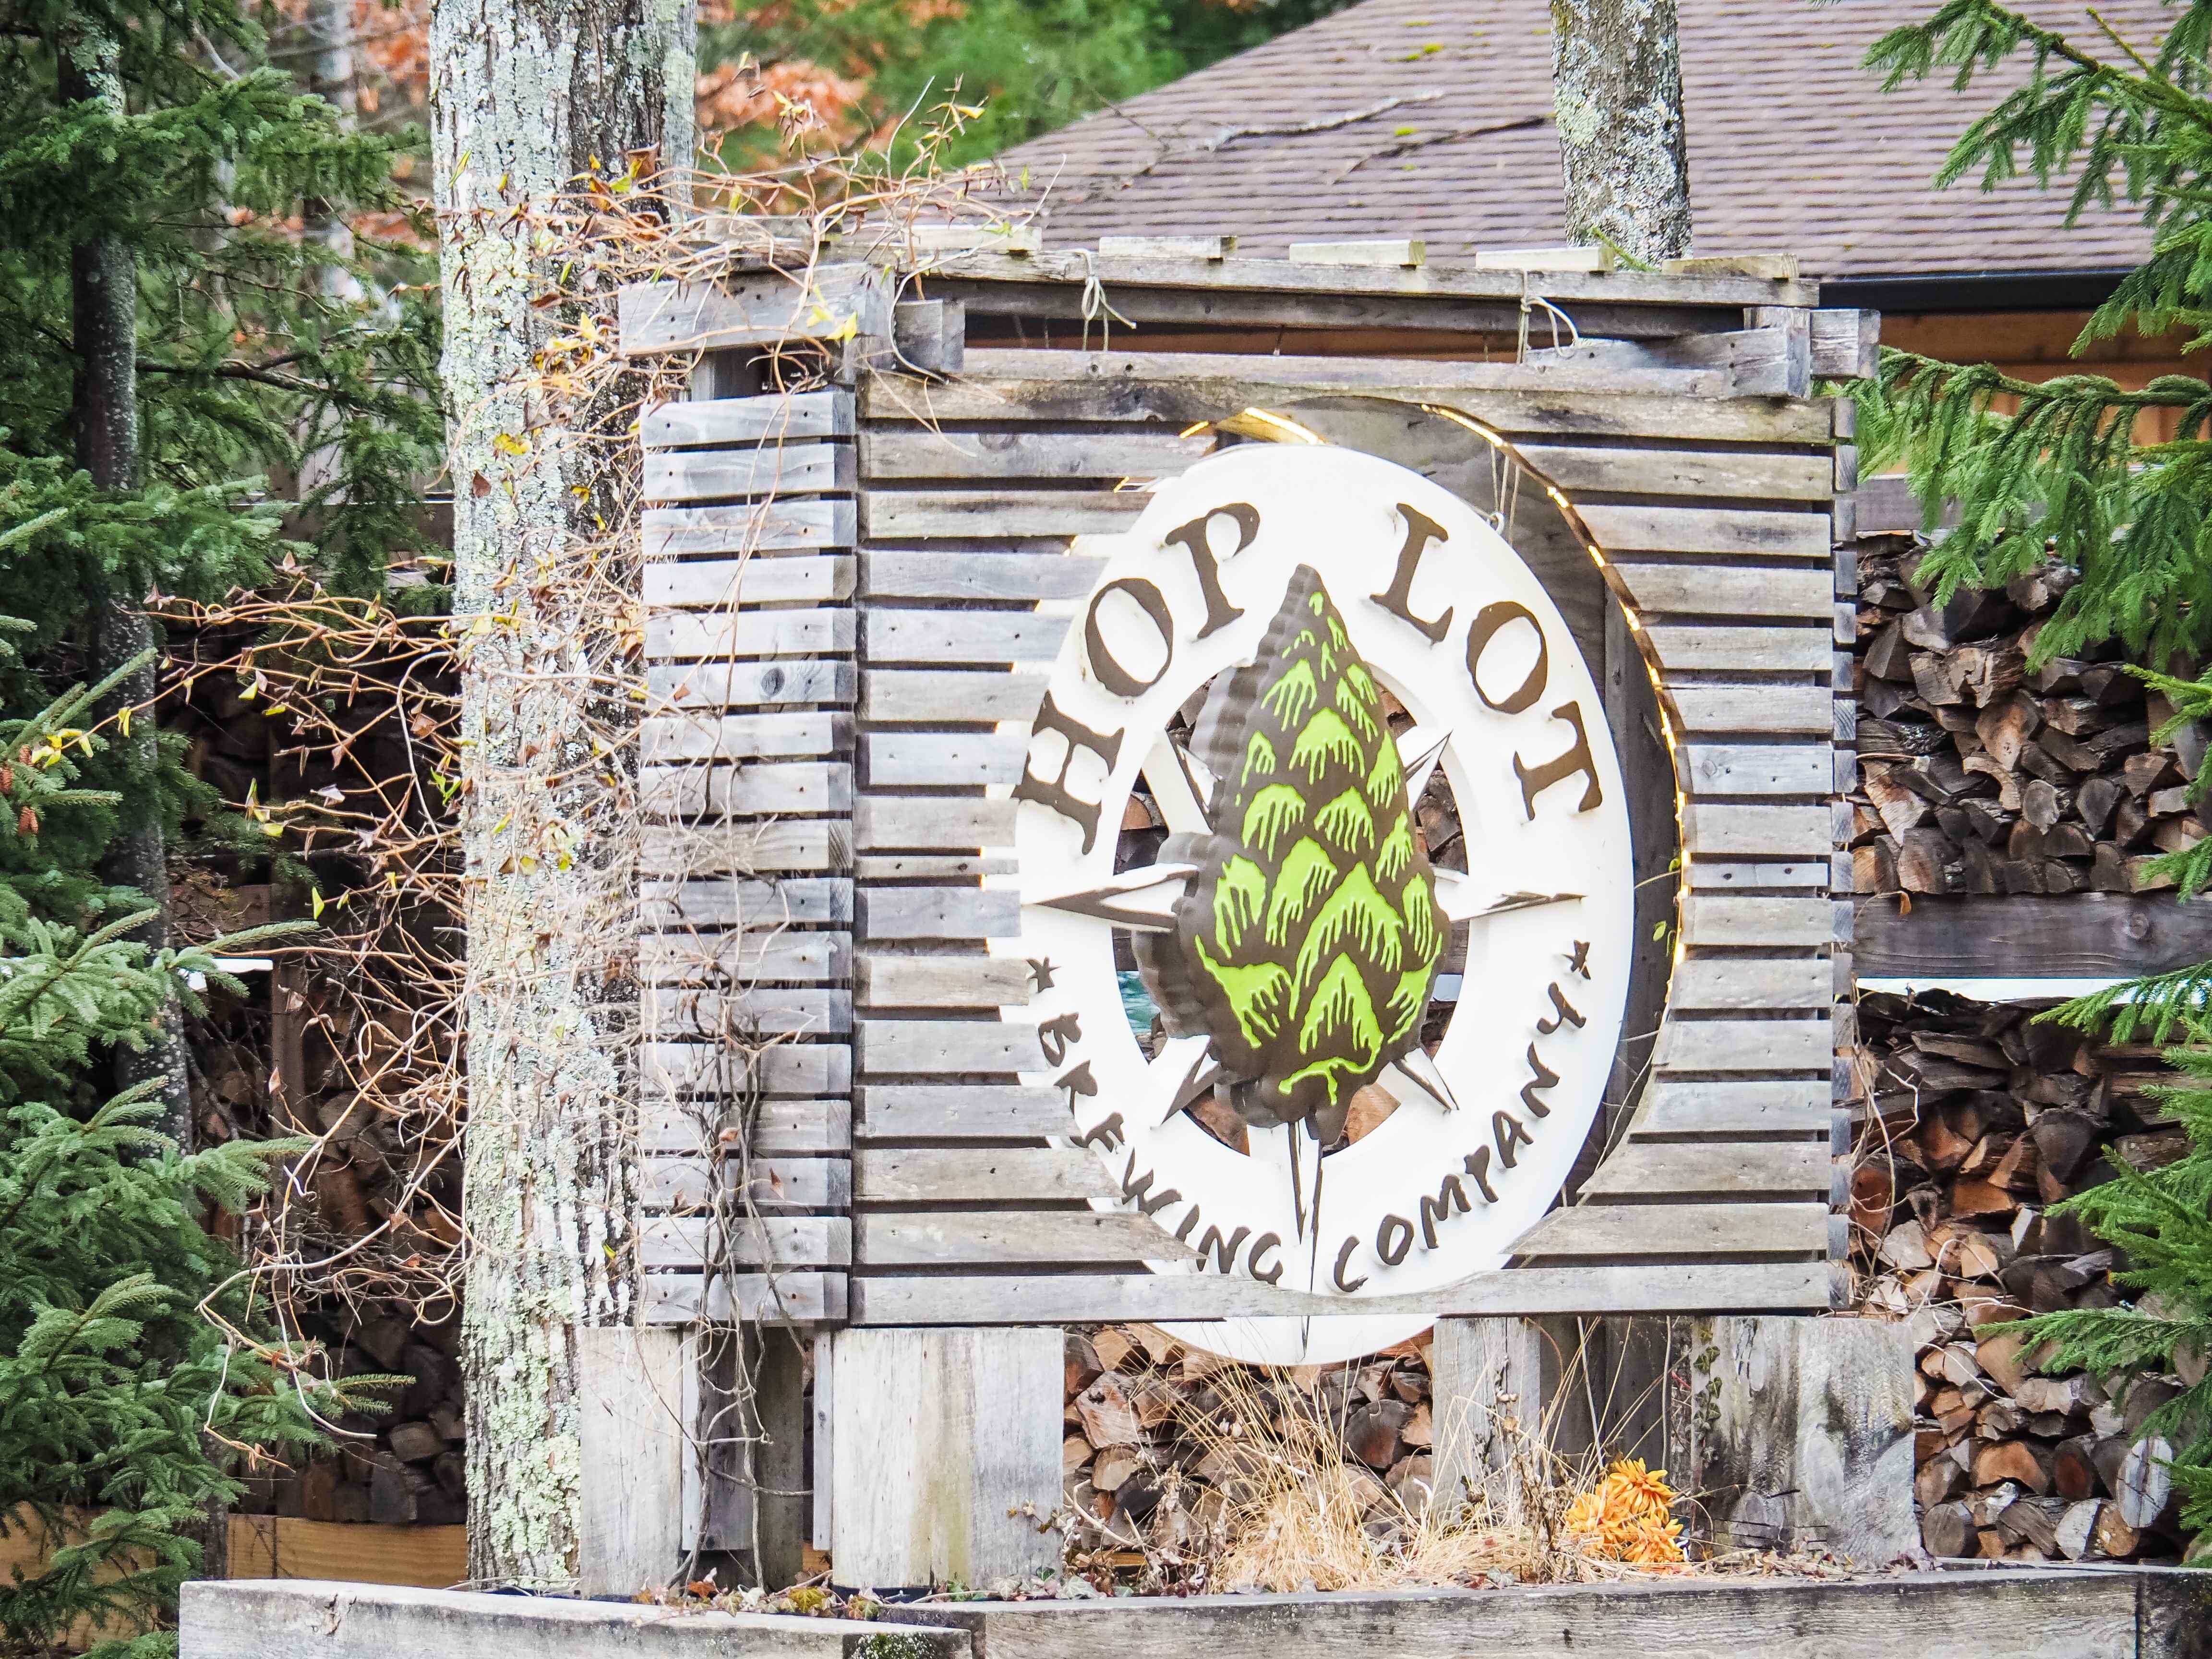 The Hop Lot Brewing Co. sign on Route 22 south of Suttons Bay.